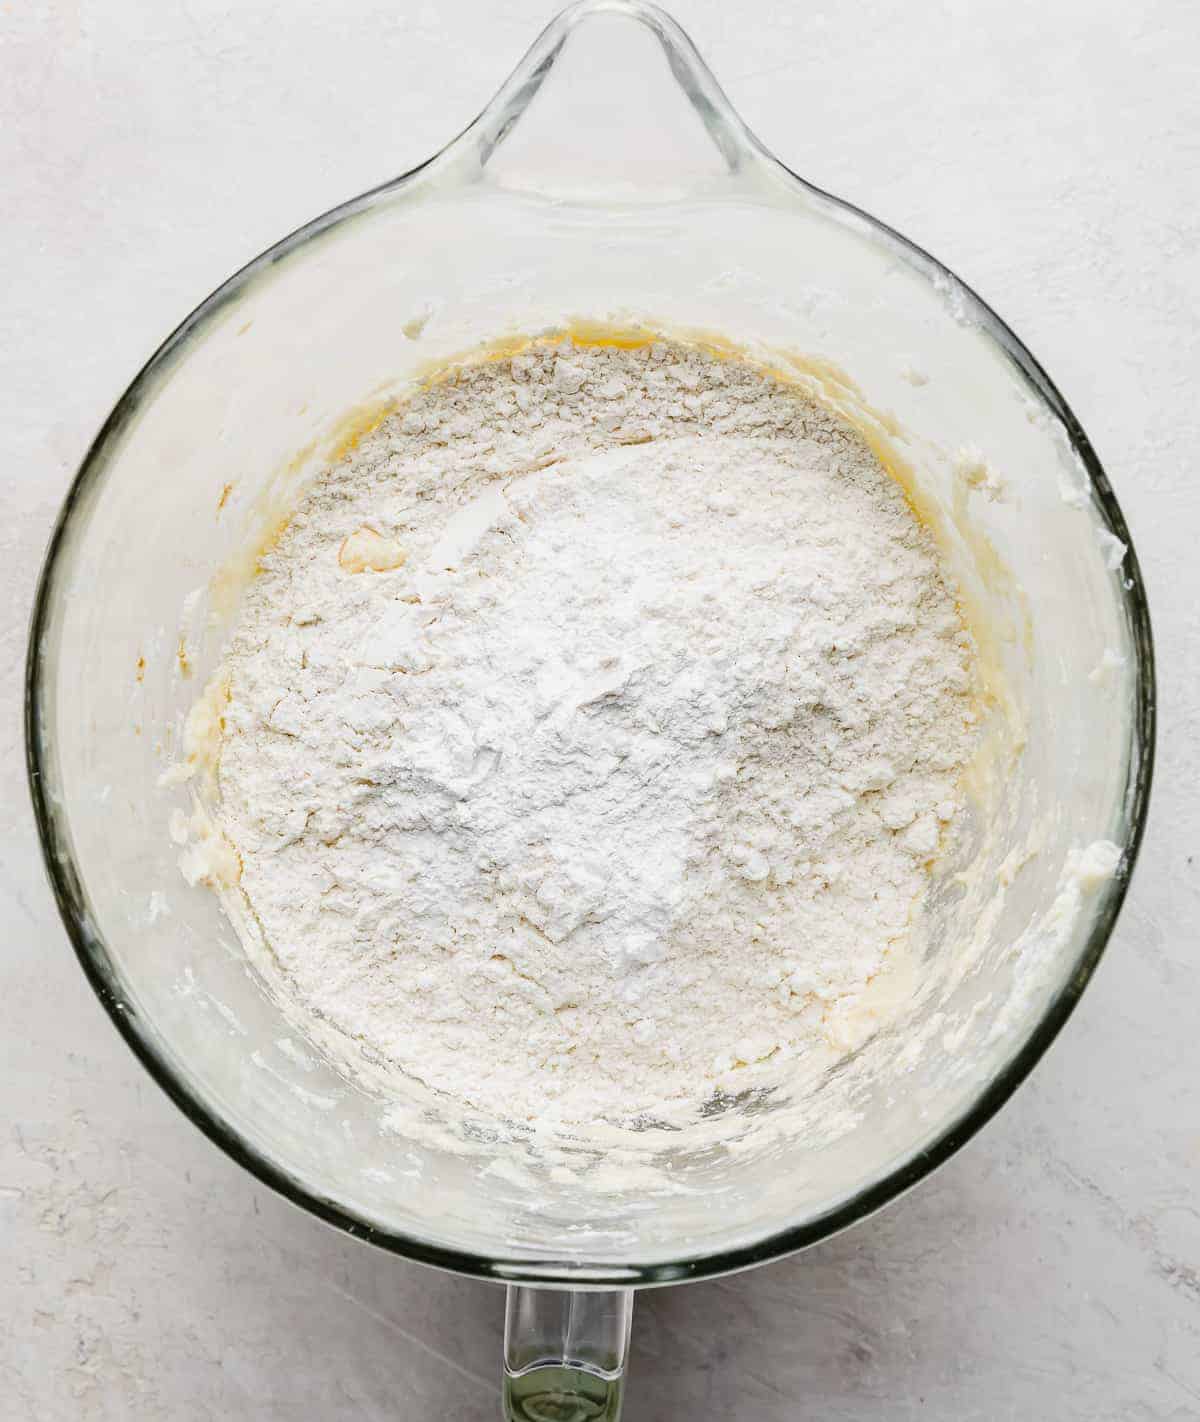 Flour and baking powder in a glass bowl on a gray background.